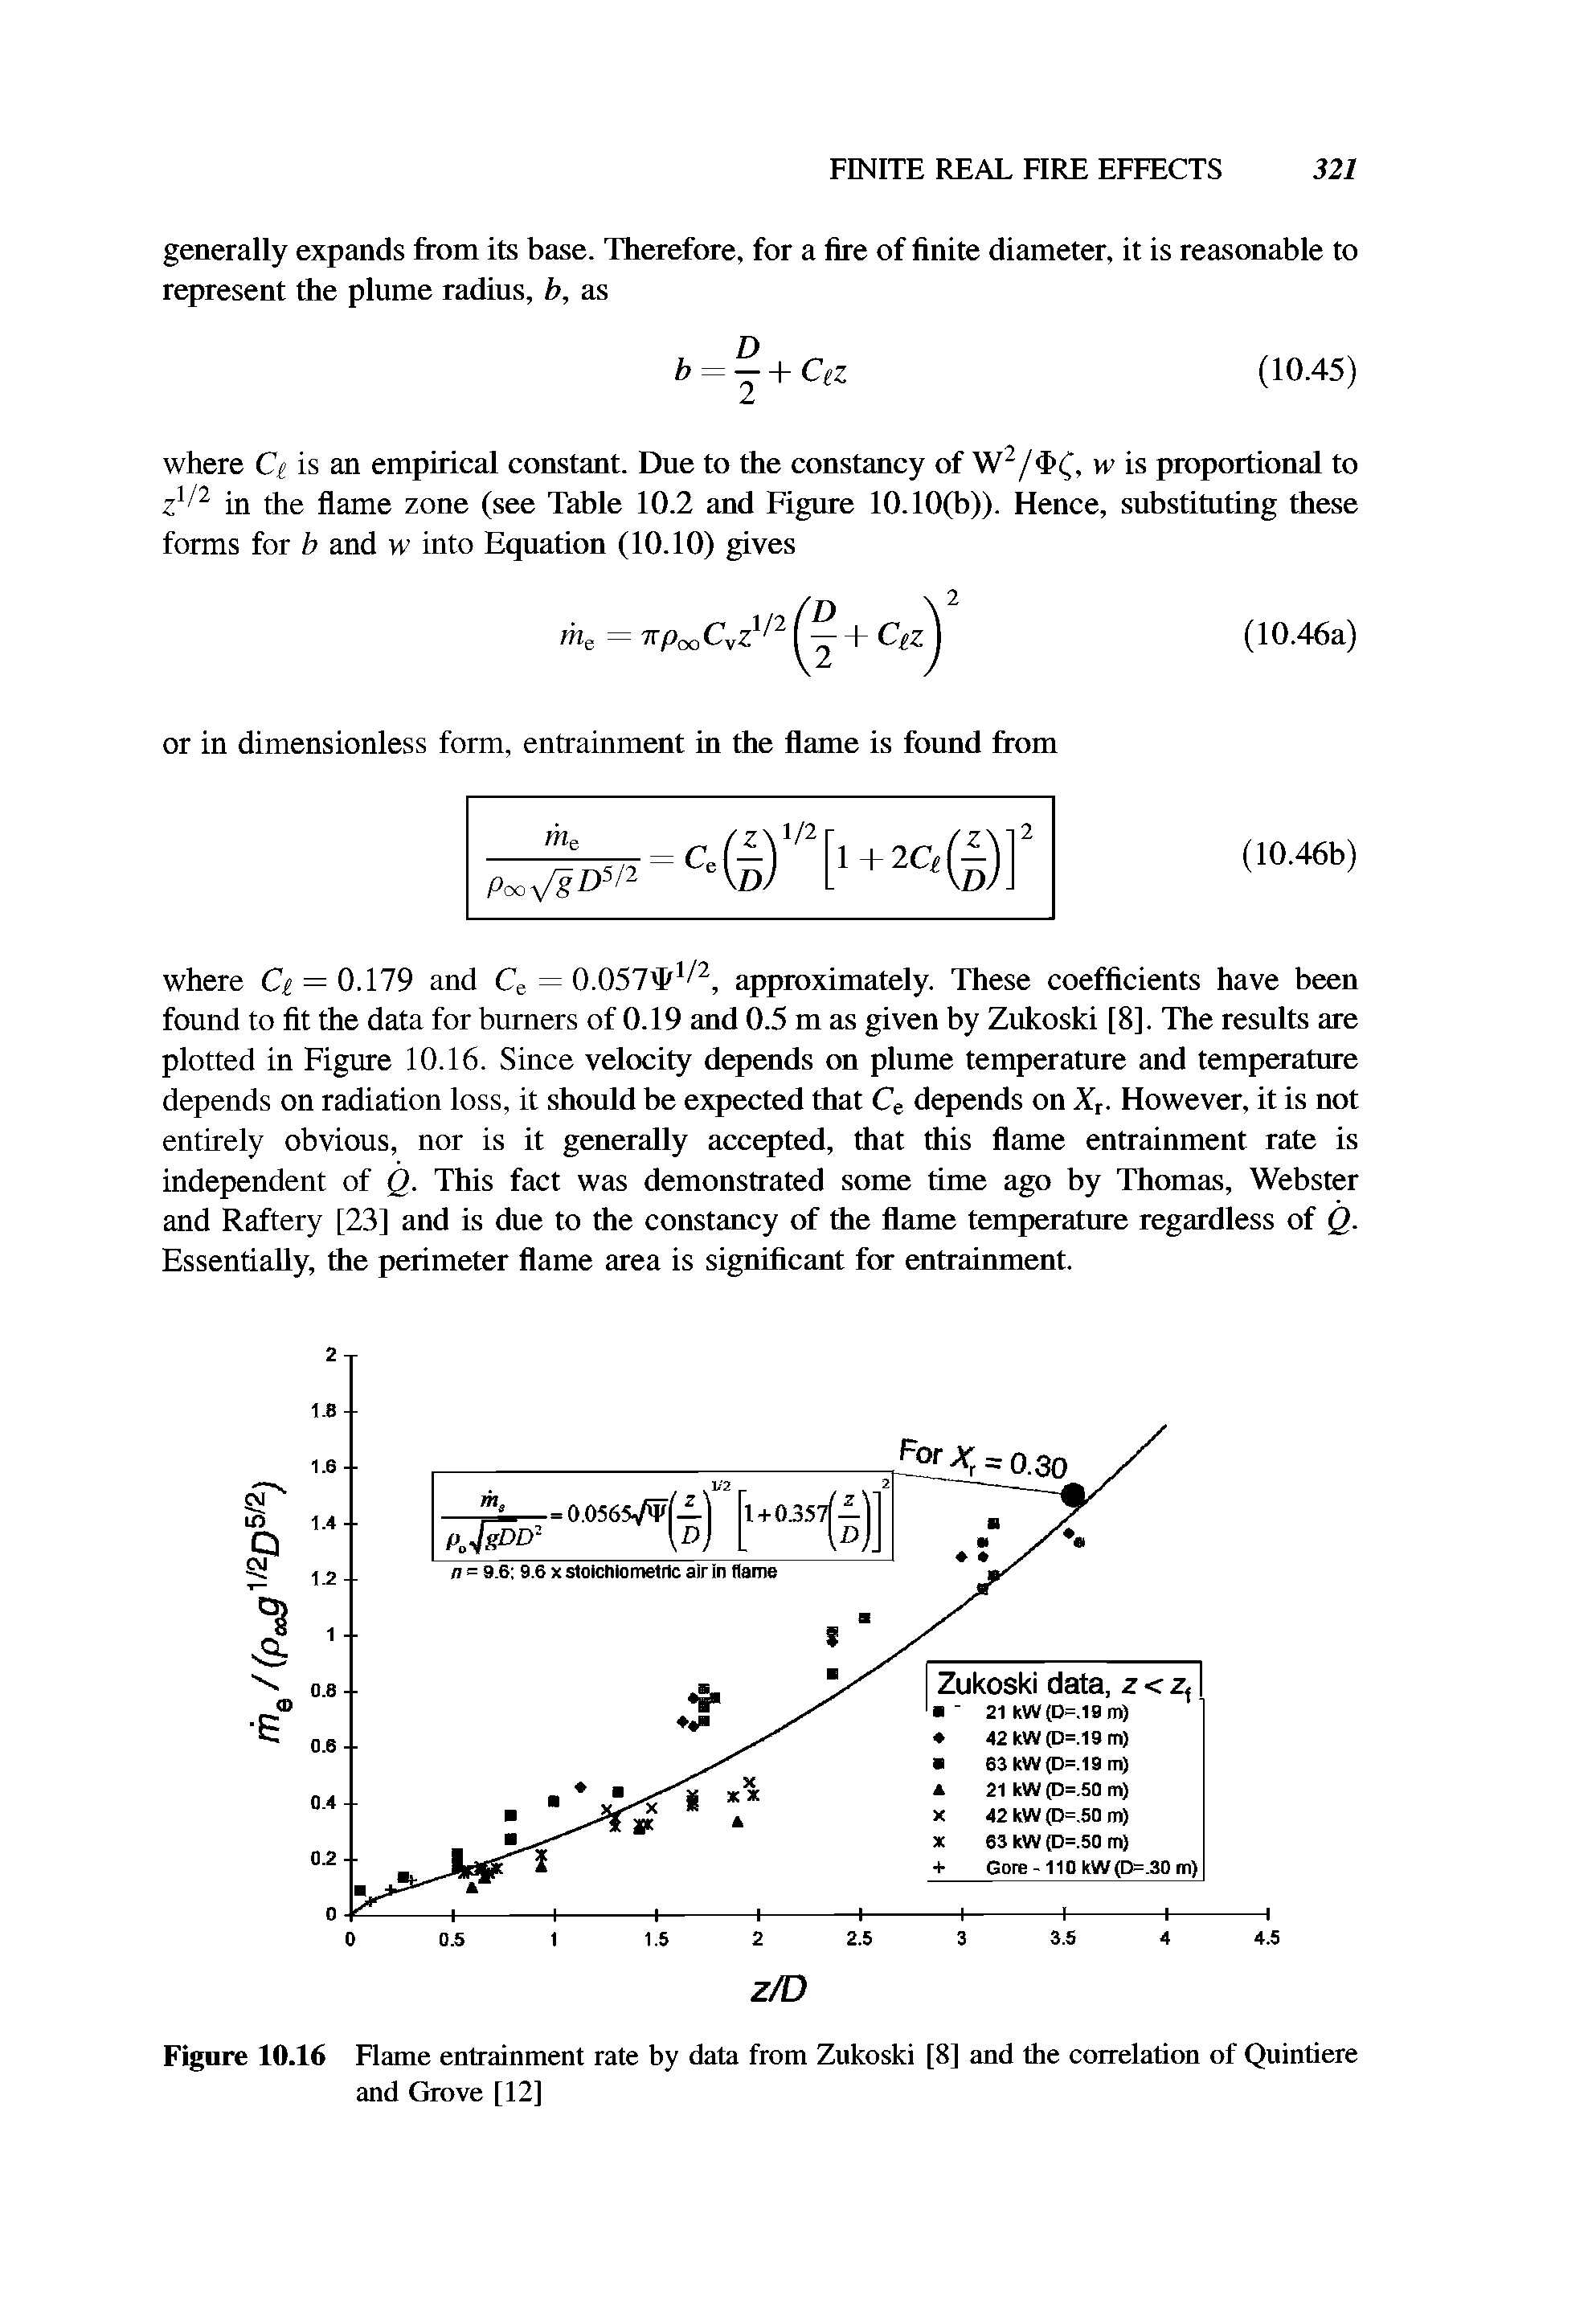 Figure 10.16 Flame entrainment rate by data from Zukoski [8] and the correlation of Quintiere and Grove [12]...